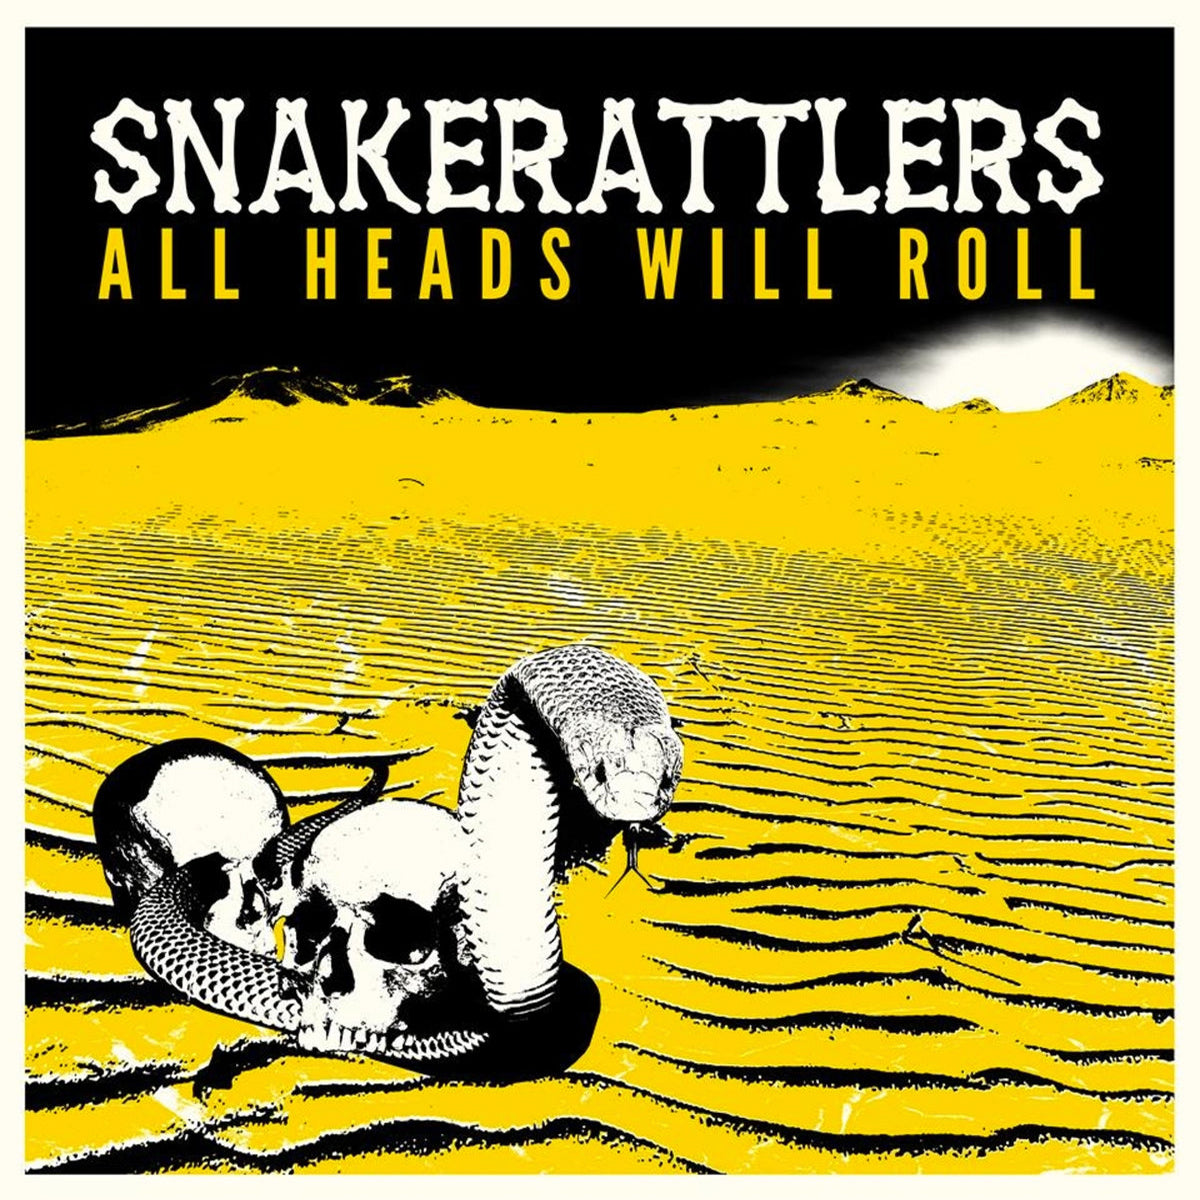 Snakerattlers- All Heads Will Roll LP ~QUEENS OF THE STONE AGE!